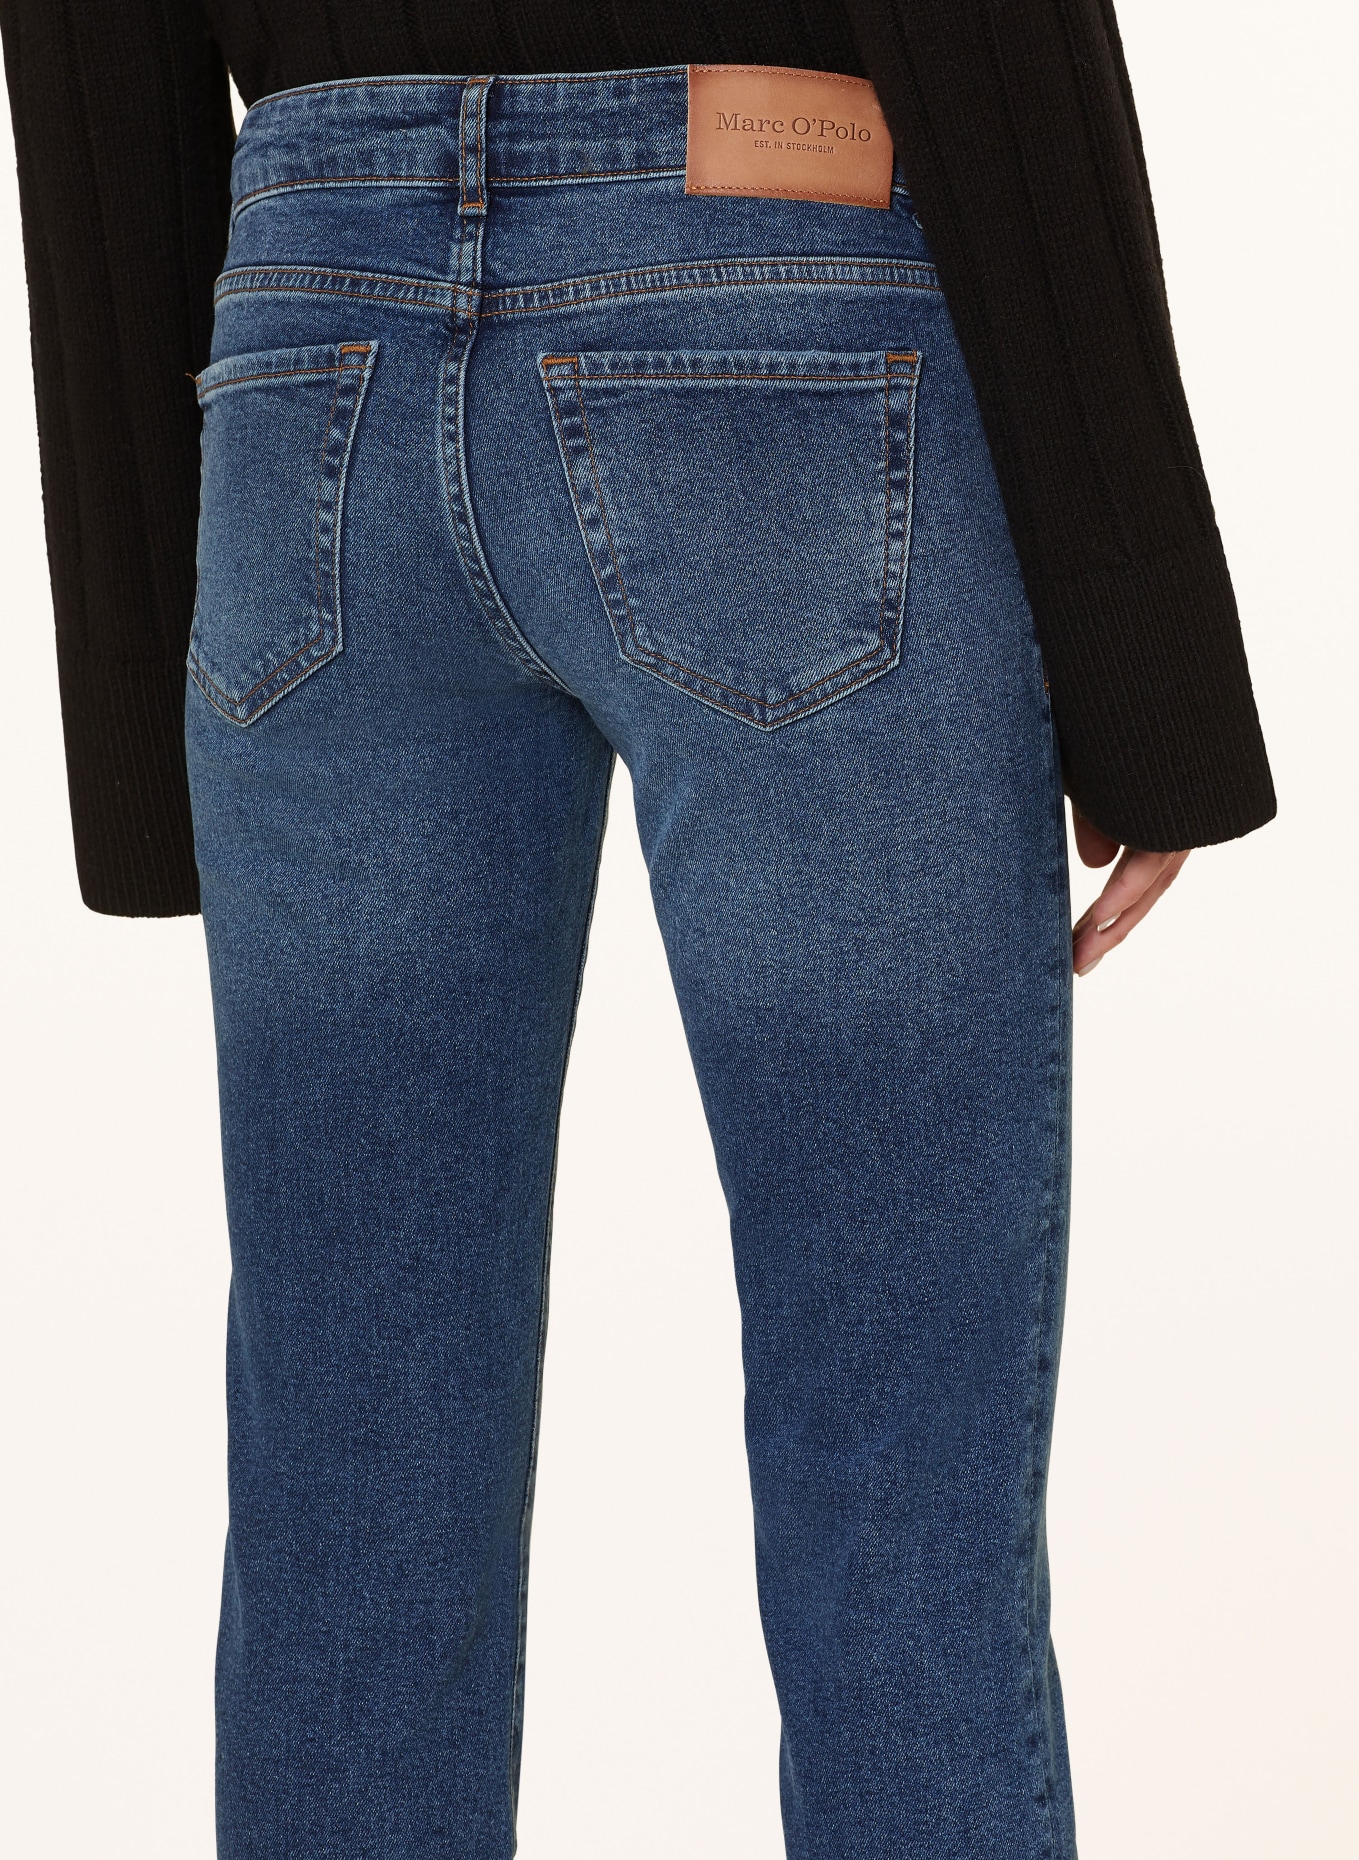 Marc O'Polo Straight jeans, Color: 075 Authentic mid blue wash (Image 5)